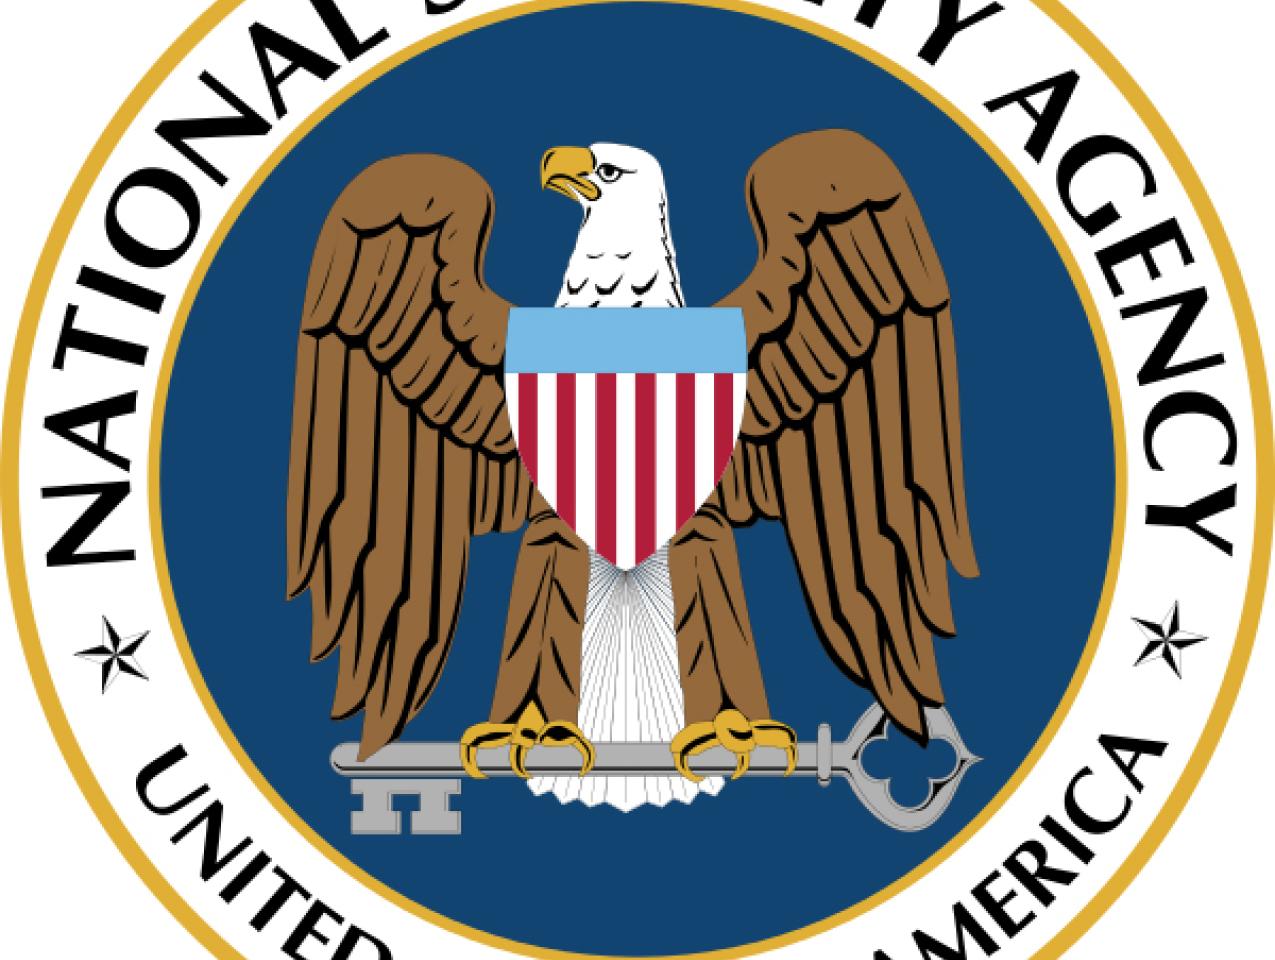 Privacy, Security, and the National Security Agency (NSA)